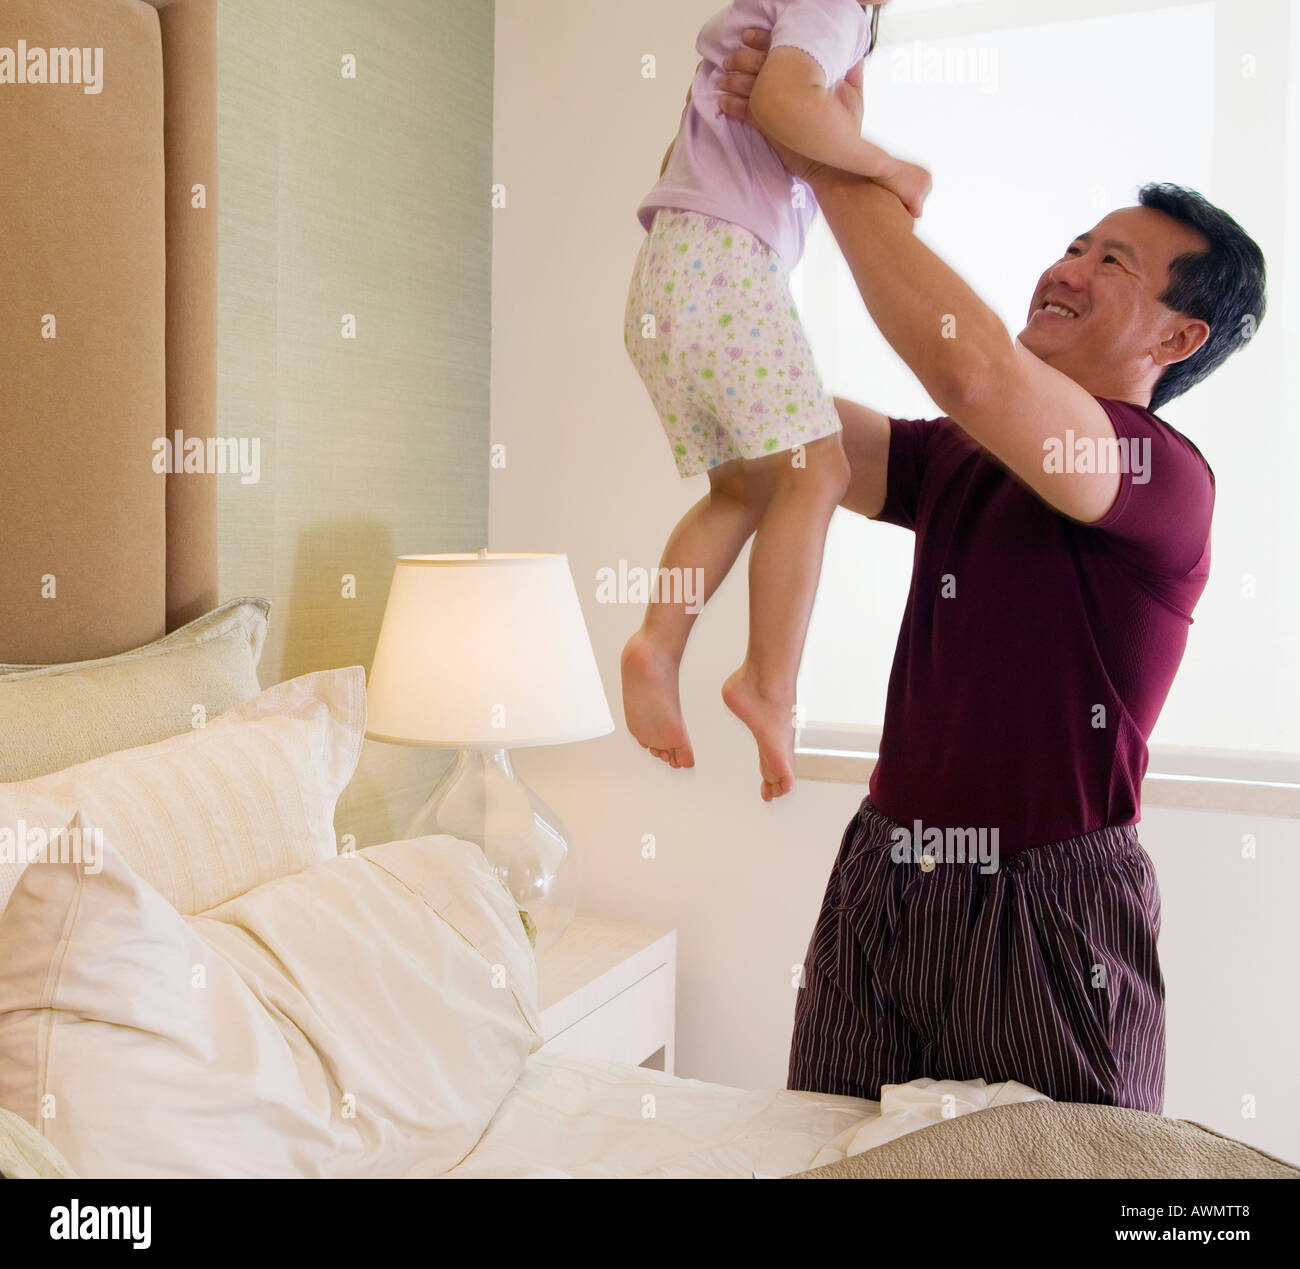 Asian father playing with daughter Stock Photo